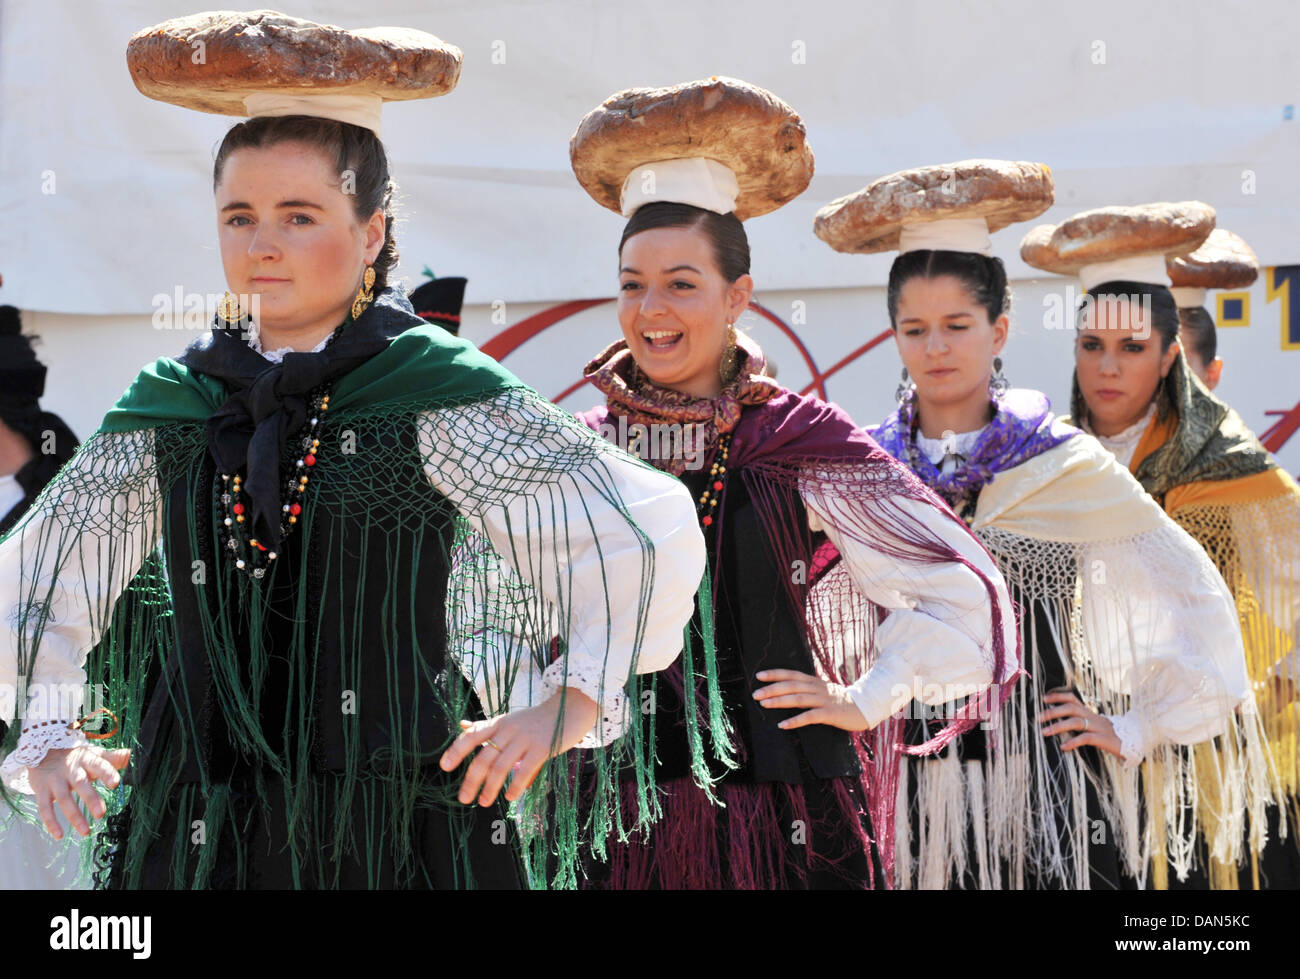 The group 'Nosa Terra' from Pereiras (Spain) performs a Spanish folk dance at the folklore festival 'Danetzare' in Erfurt, Germany, 08 July 2011. Till 10 July 2011, 20 German and international dance groups will perform at the festival. Photo: Martin Schutt Stock Photo